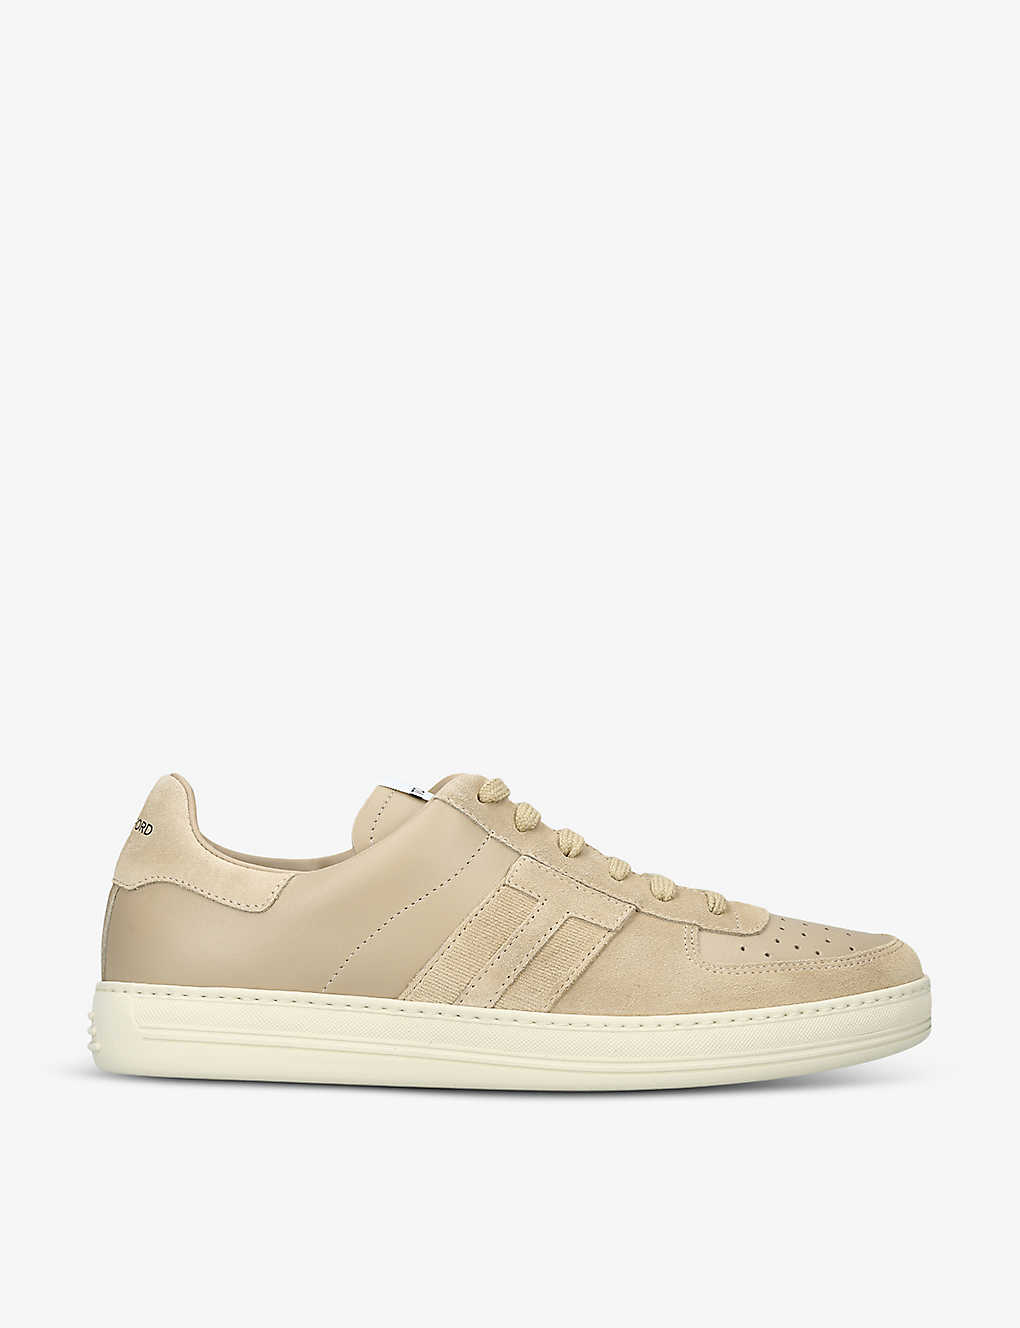 Tom Ford Mens Cream Comb Radcliffe Leather And Suede Low-top Trainers